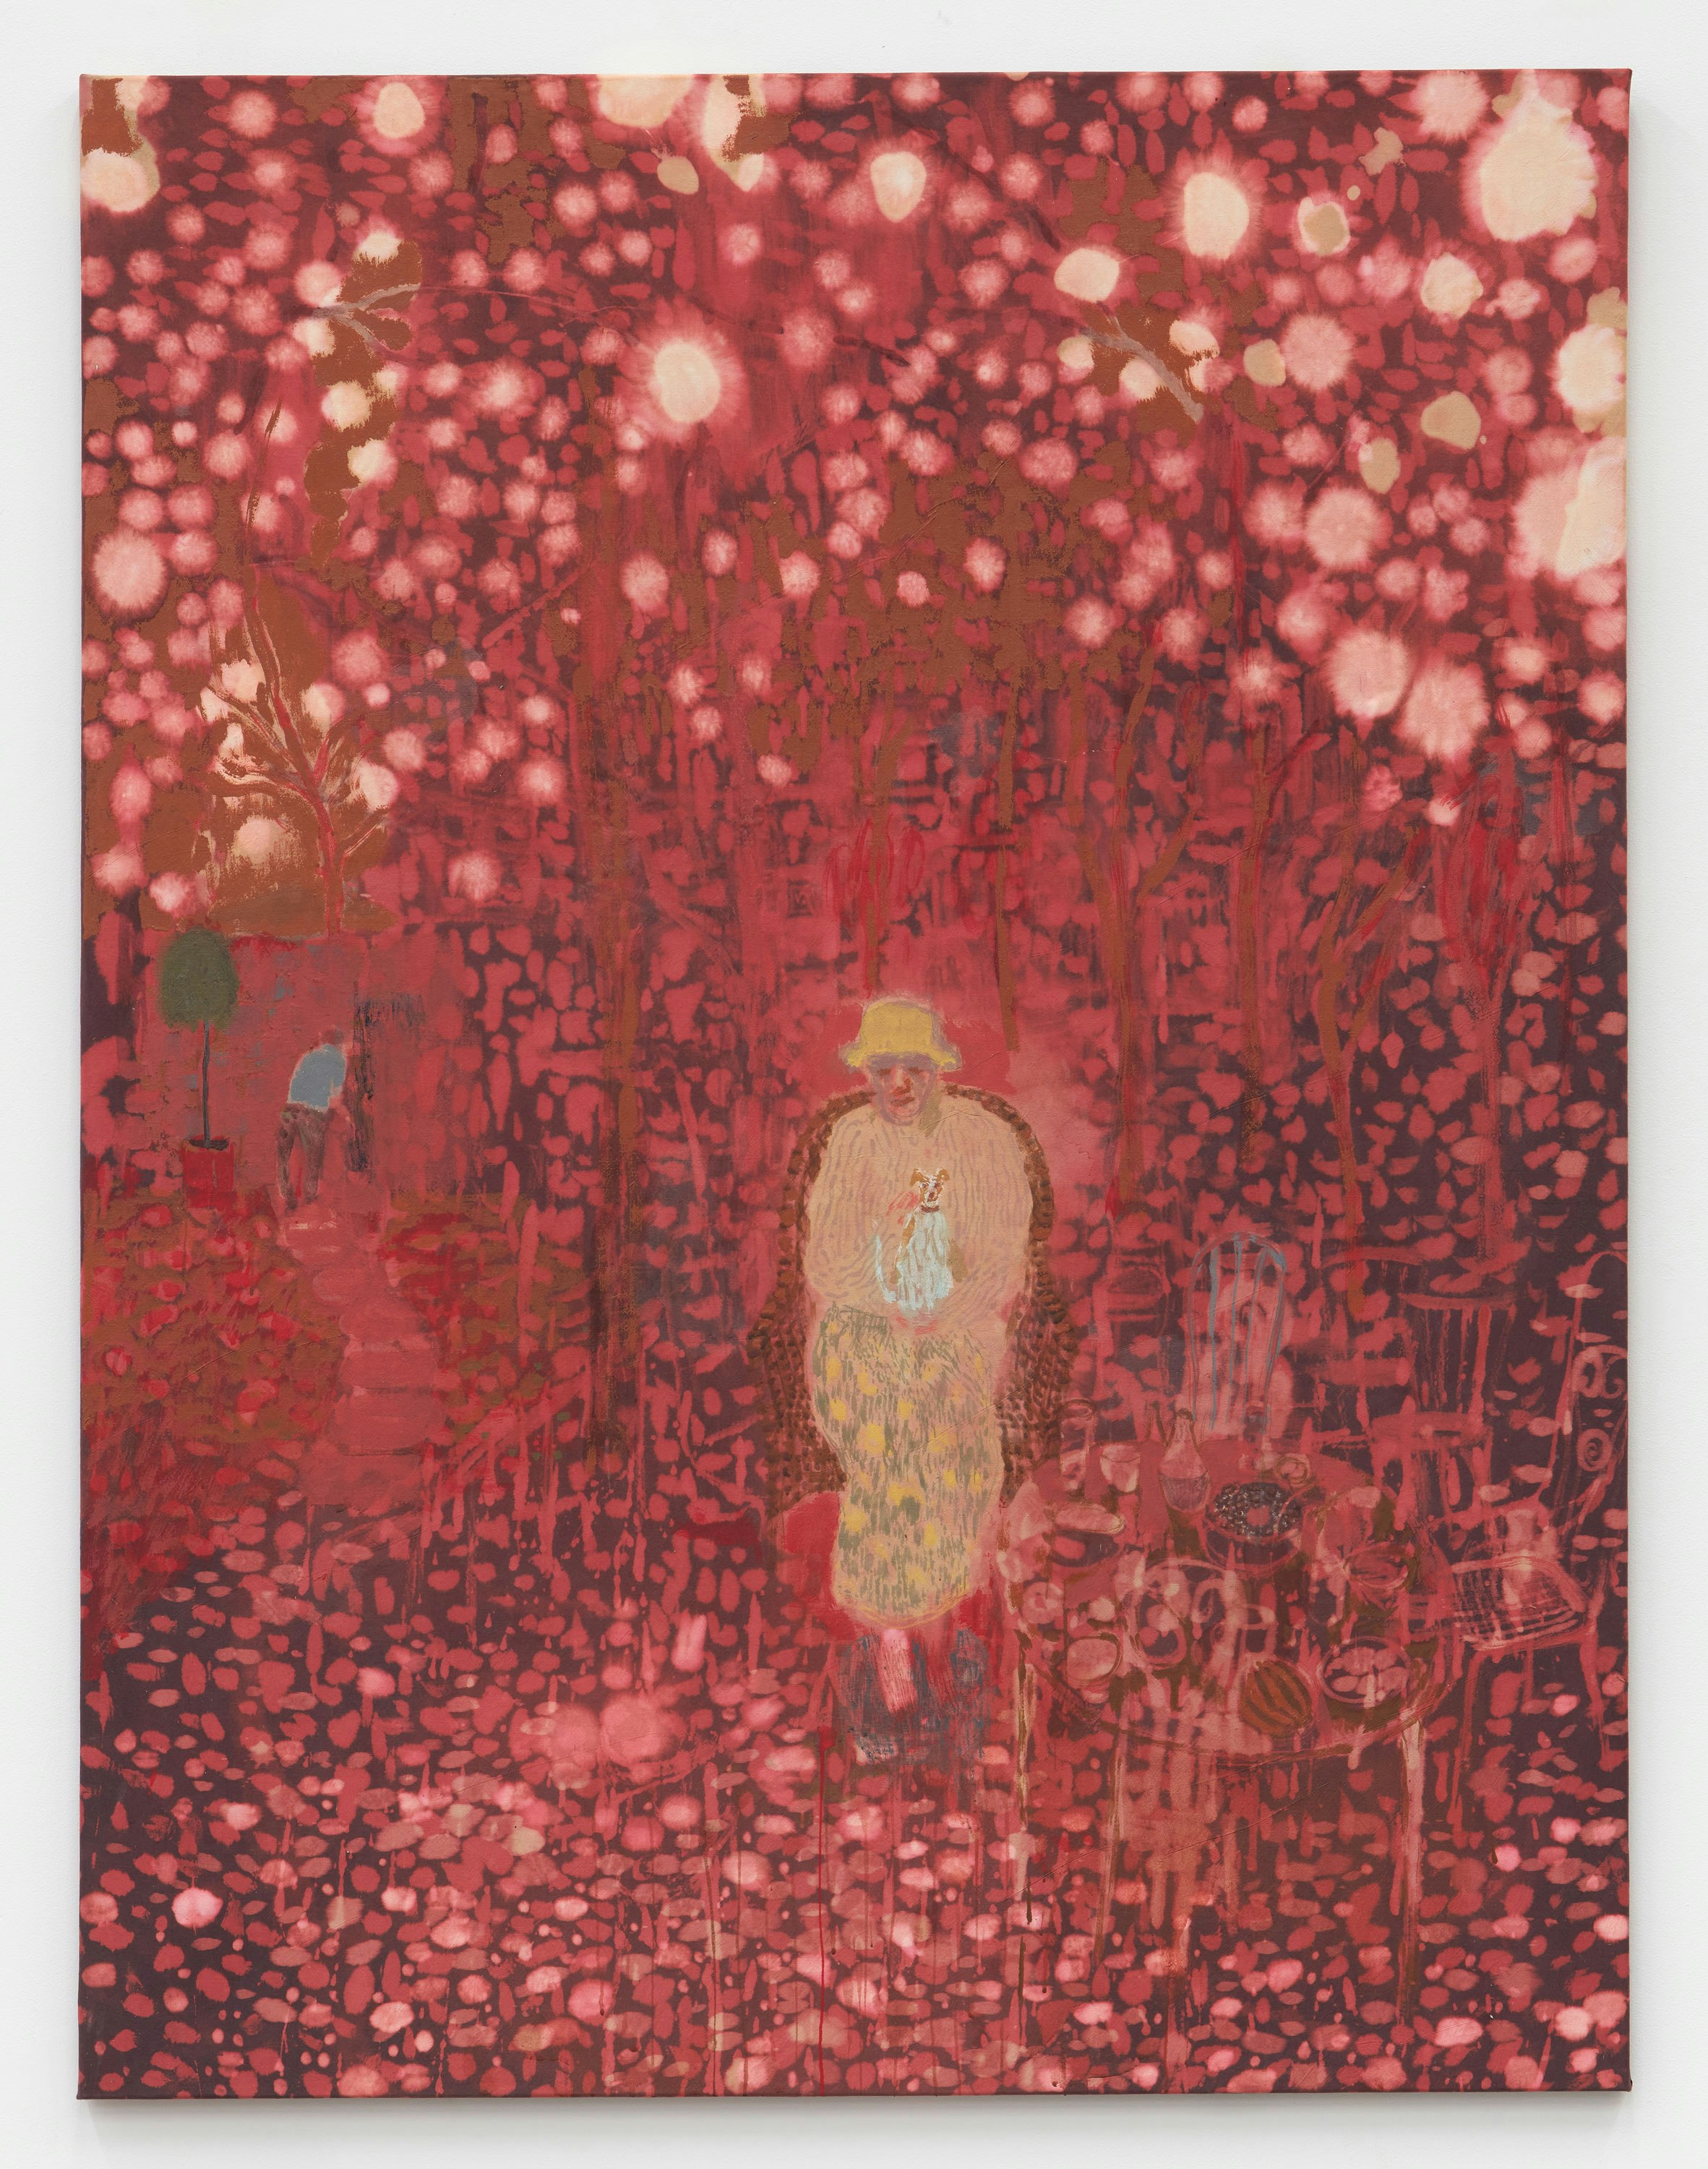 Andrew Cranston, <em>Waiting for the Bell</em>, 2021. Rabbit skin glue and pigment on bleached canvas, 66 7/8 x 51 1/8 inches. Courtesy the artist and Karma, New York.